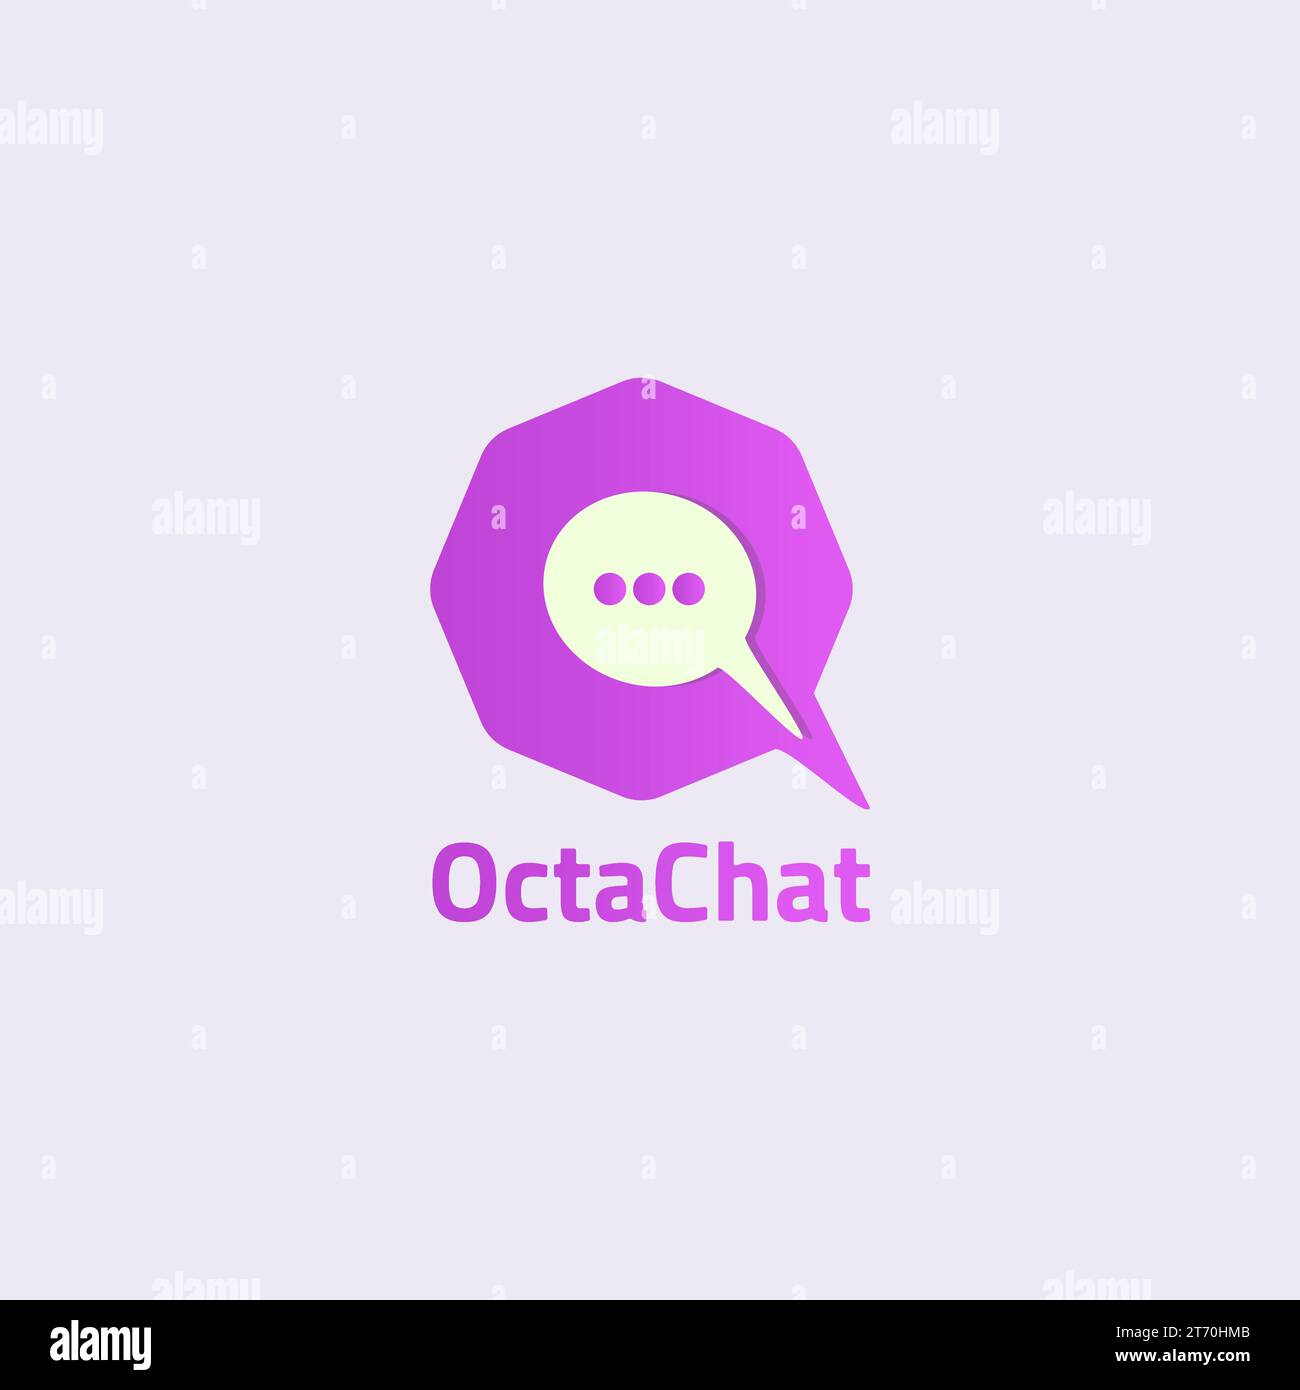 Chat app logo with octagon shape and letter Q. Stock Vector